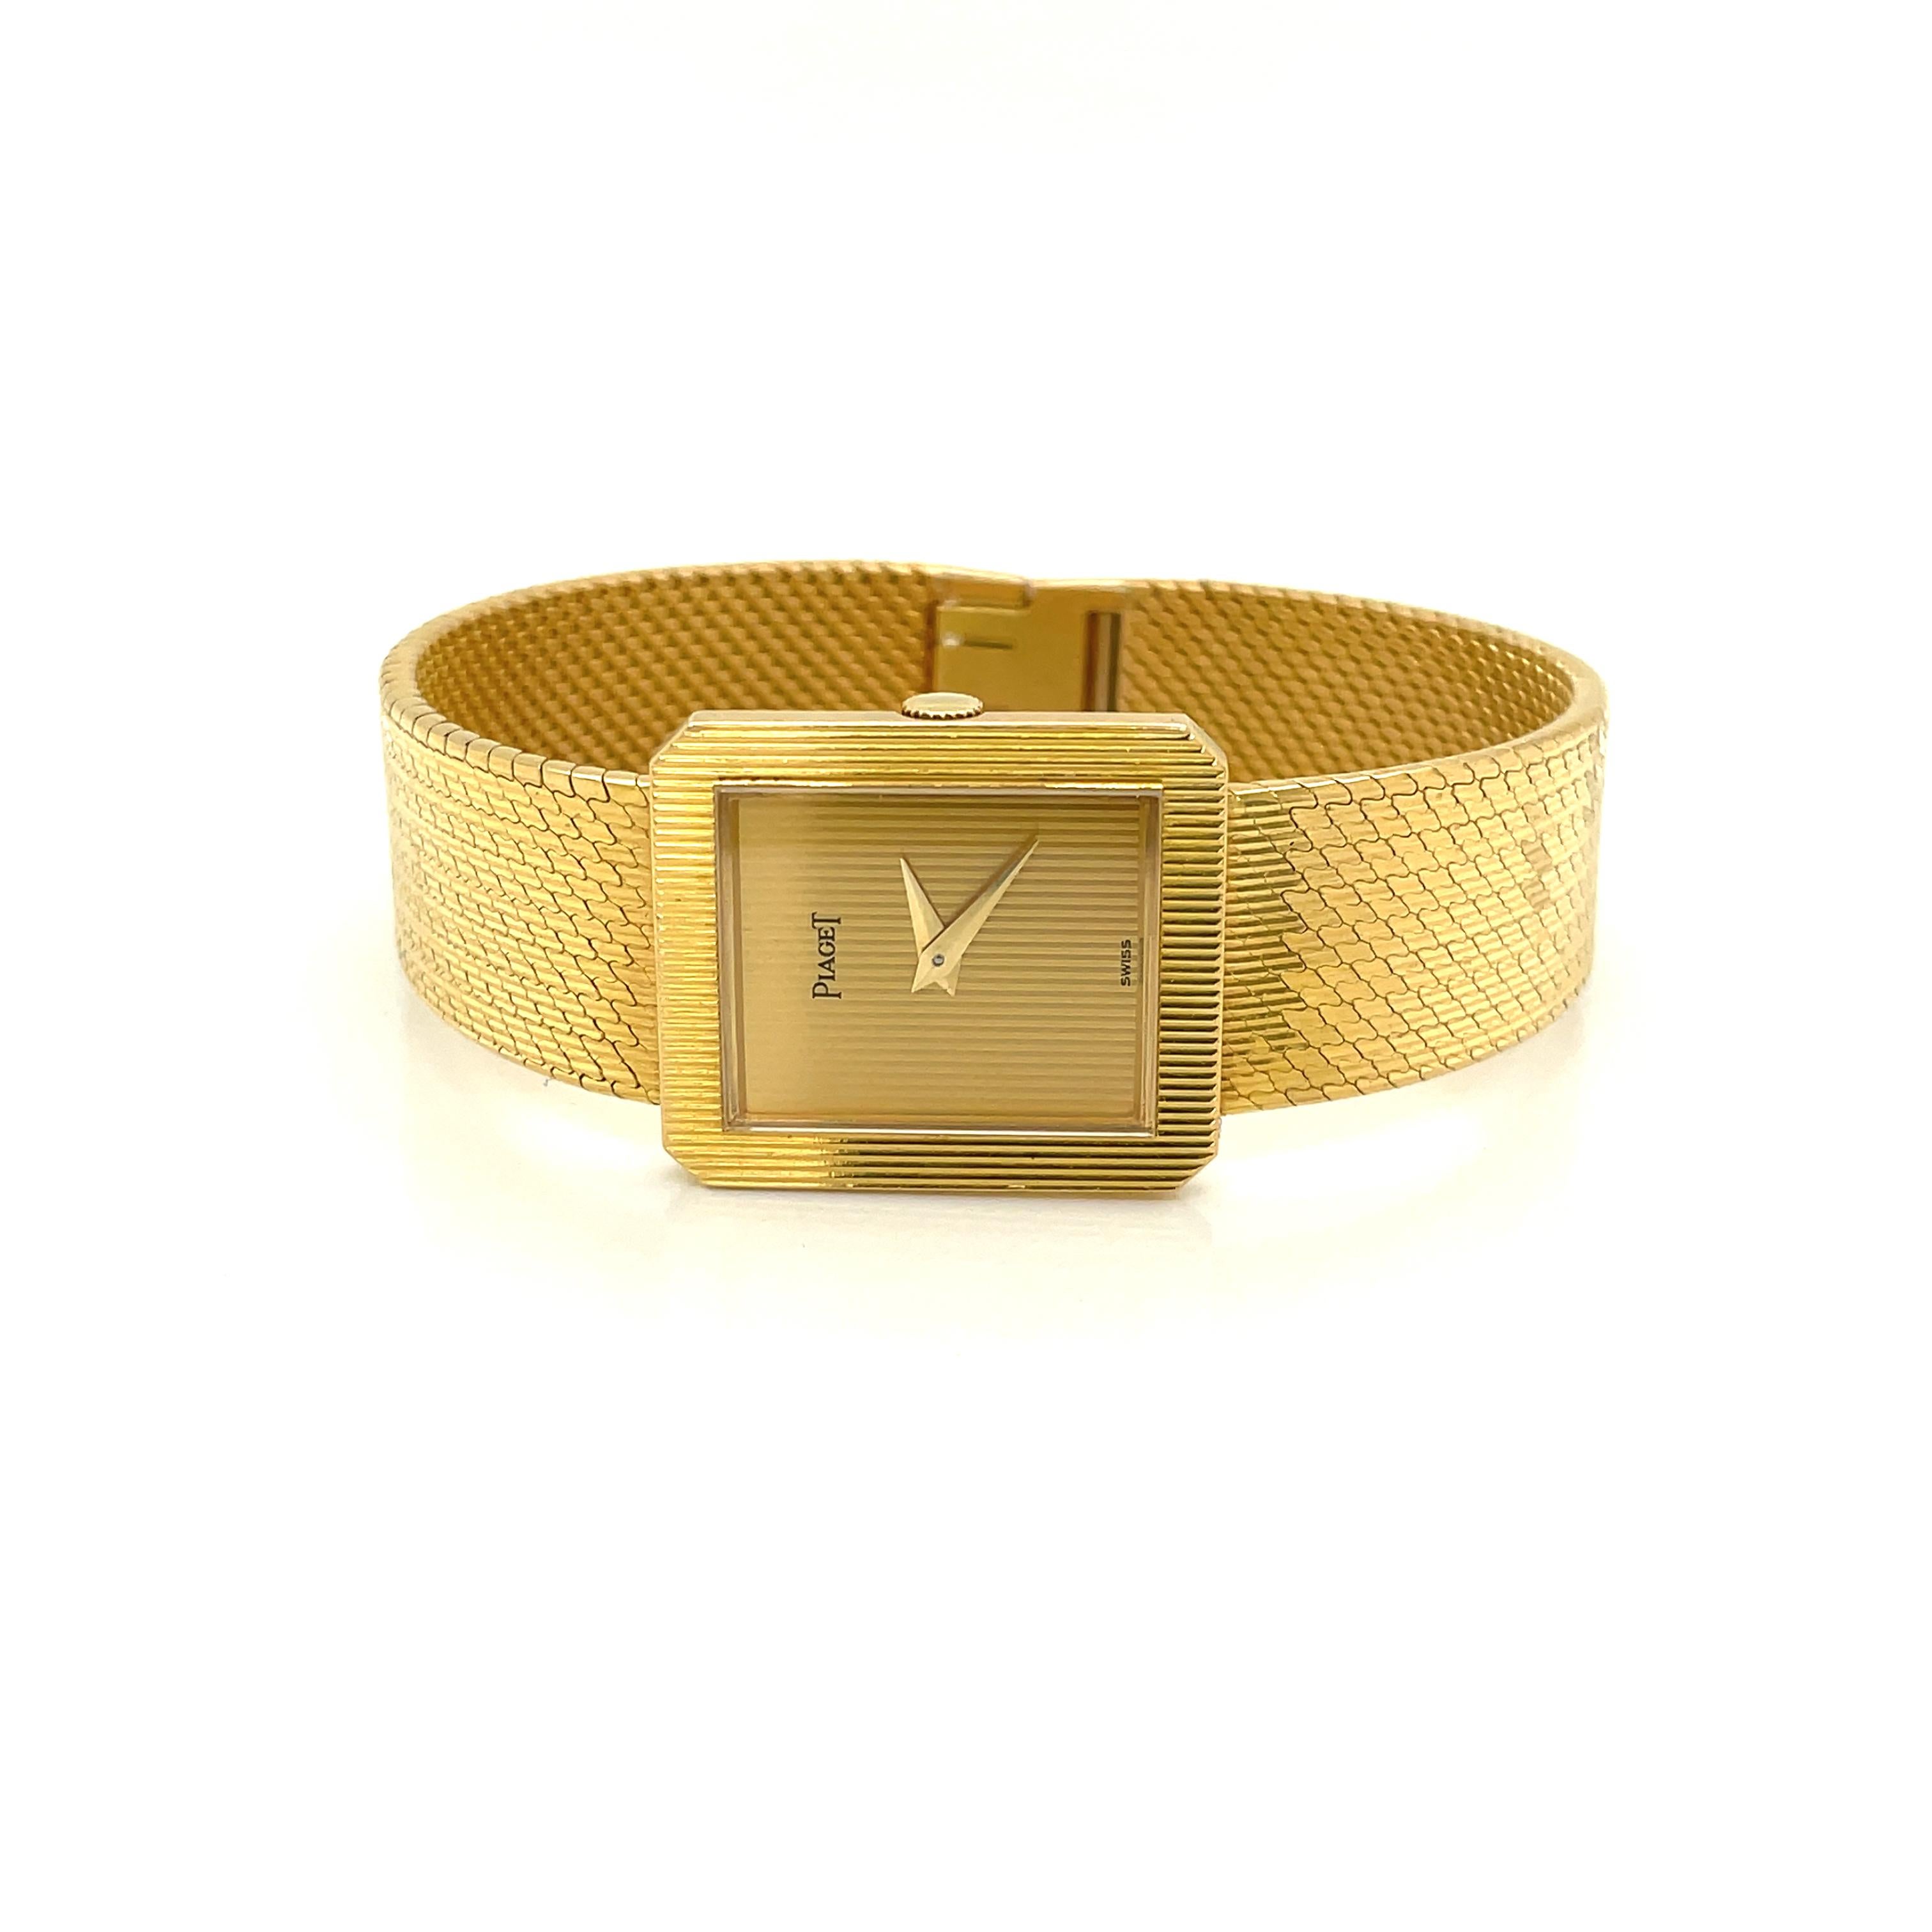 With one of the best reputations for fine luxury watches, this Piaget Ladies Wrist Watch surely delivers. Circa 1980's, with a sleek look, the elegant 18 karat yellow gold integrated bracelet with smooth flat brick patterned links displays as fine